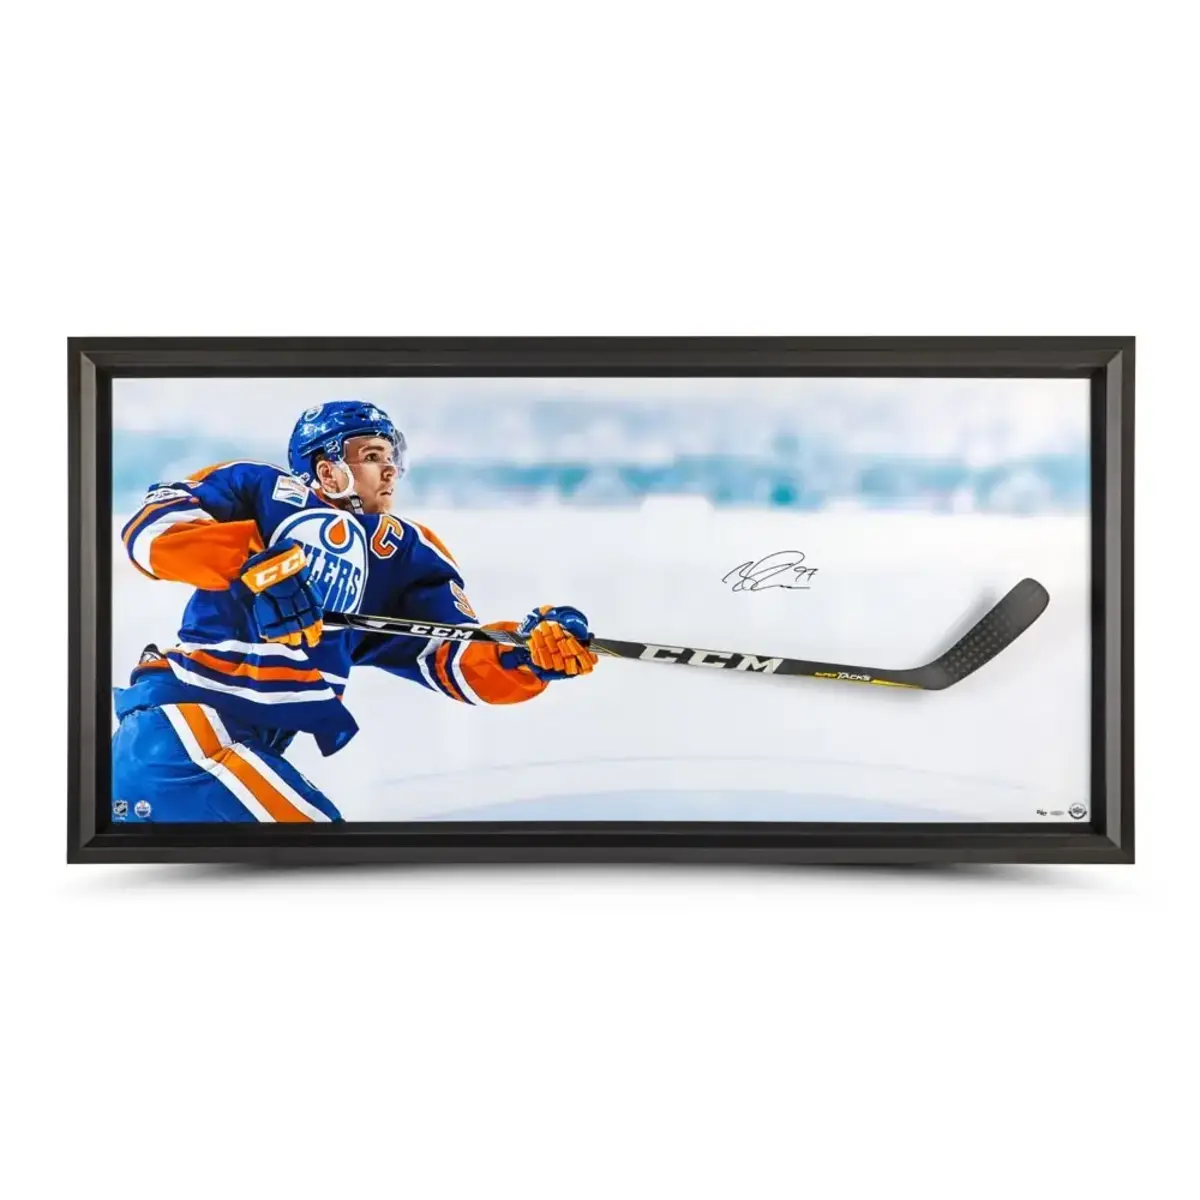 A Connor McDavid "Sharpshooter" limited-edition, autographed framed piece that features a CCM Ultra Tacks hockey stick breaking through the plexiglass.